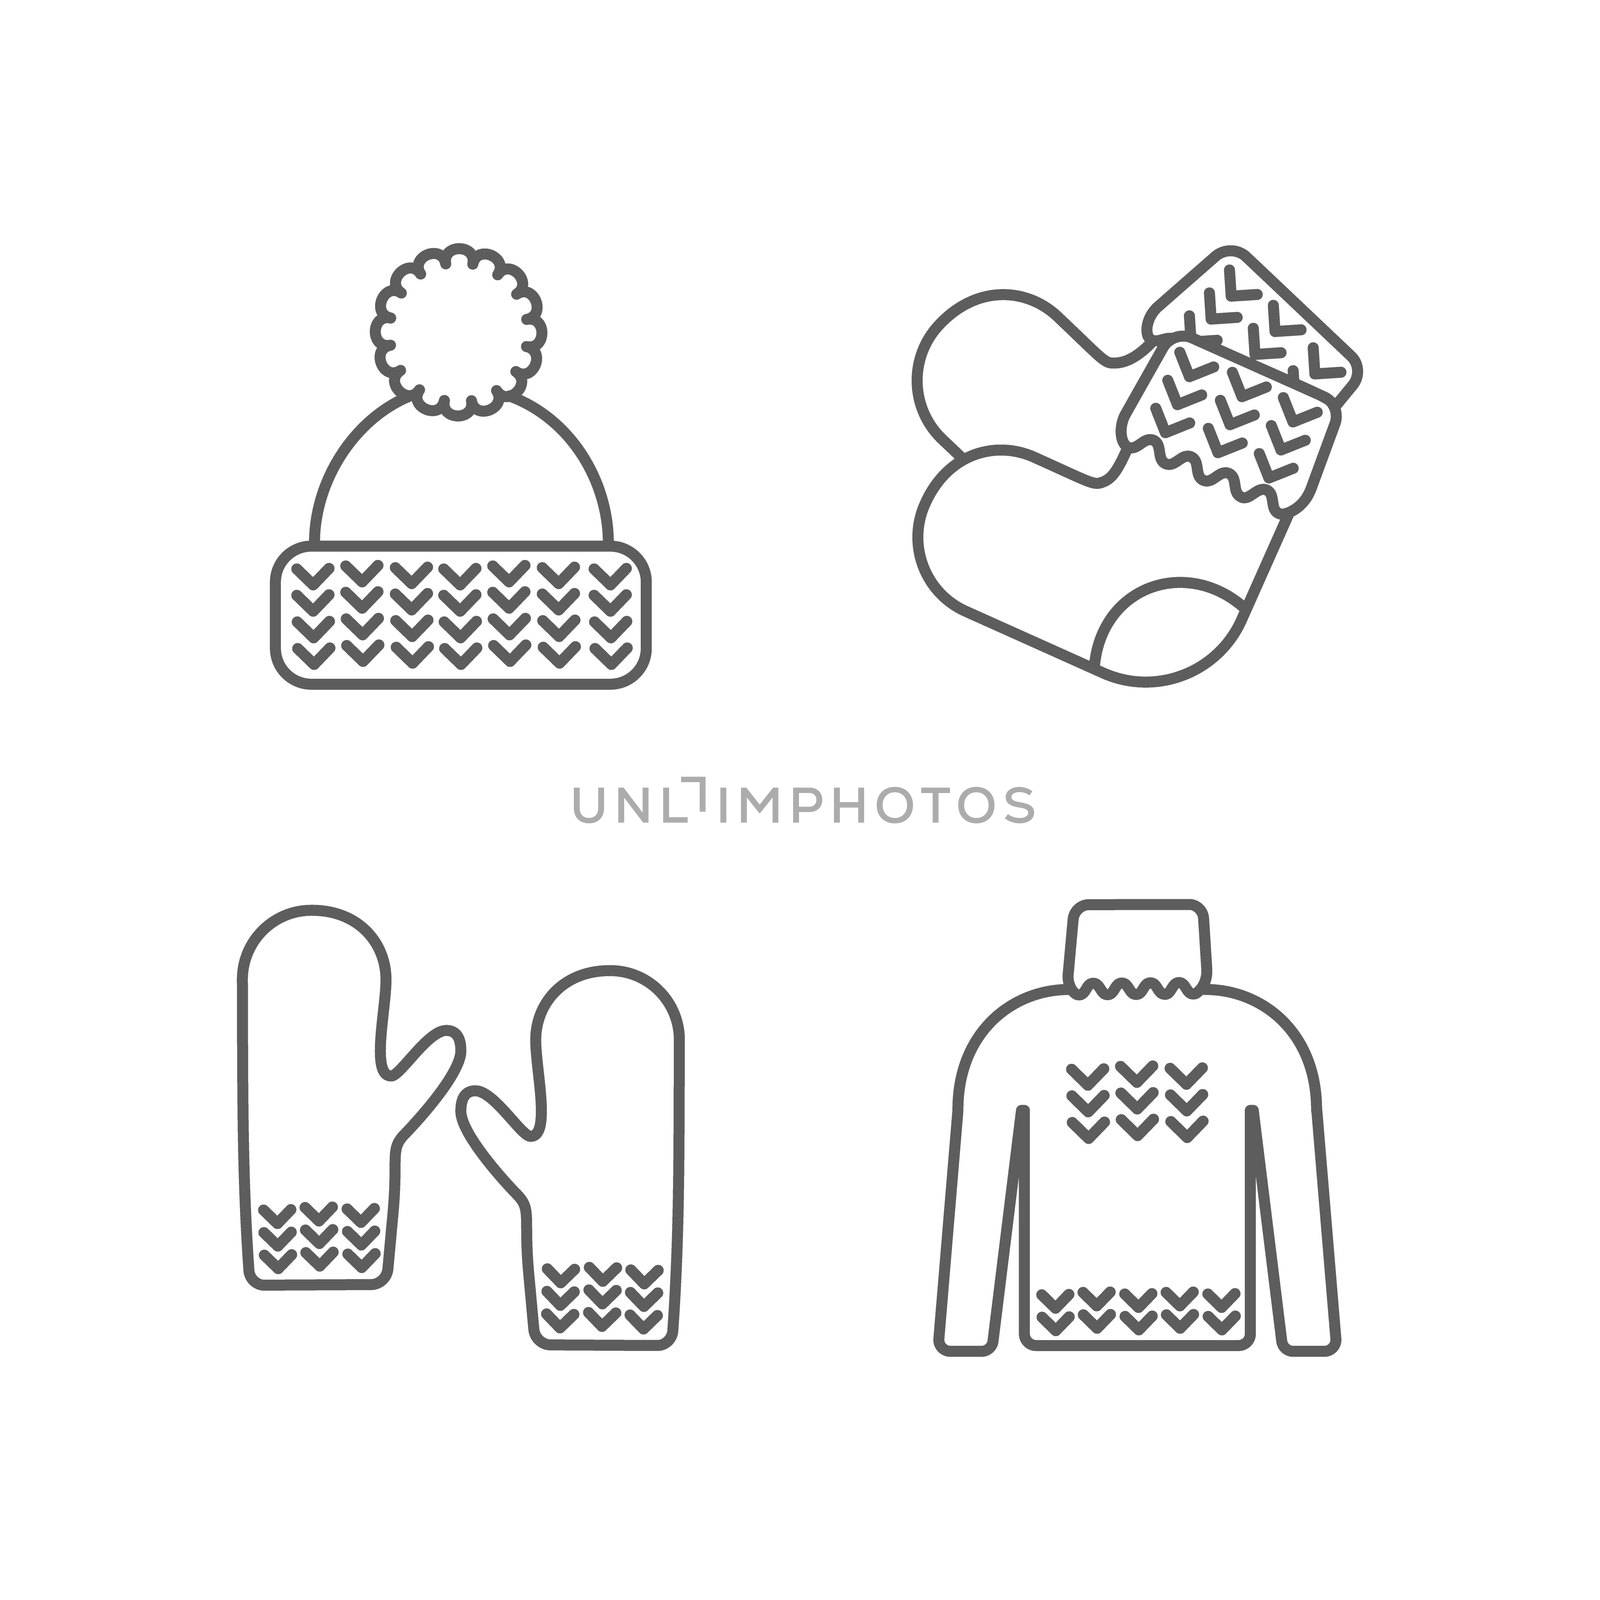 Winter warm knitted clothes icon set. Hat, mittens, socks, sweater hand-knitted garments. Yarn, knitting clothes, knitted samples thin line sign. Knit thin line pictograms.